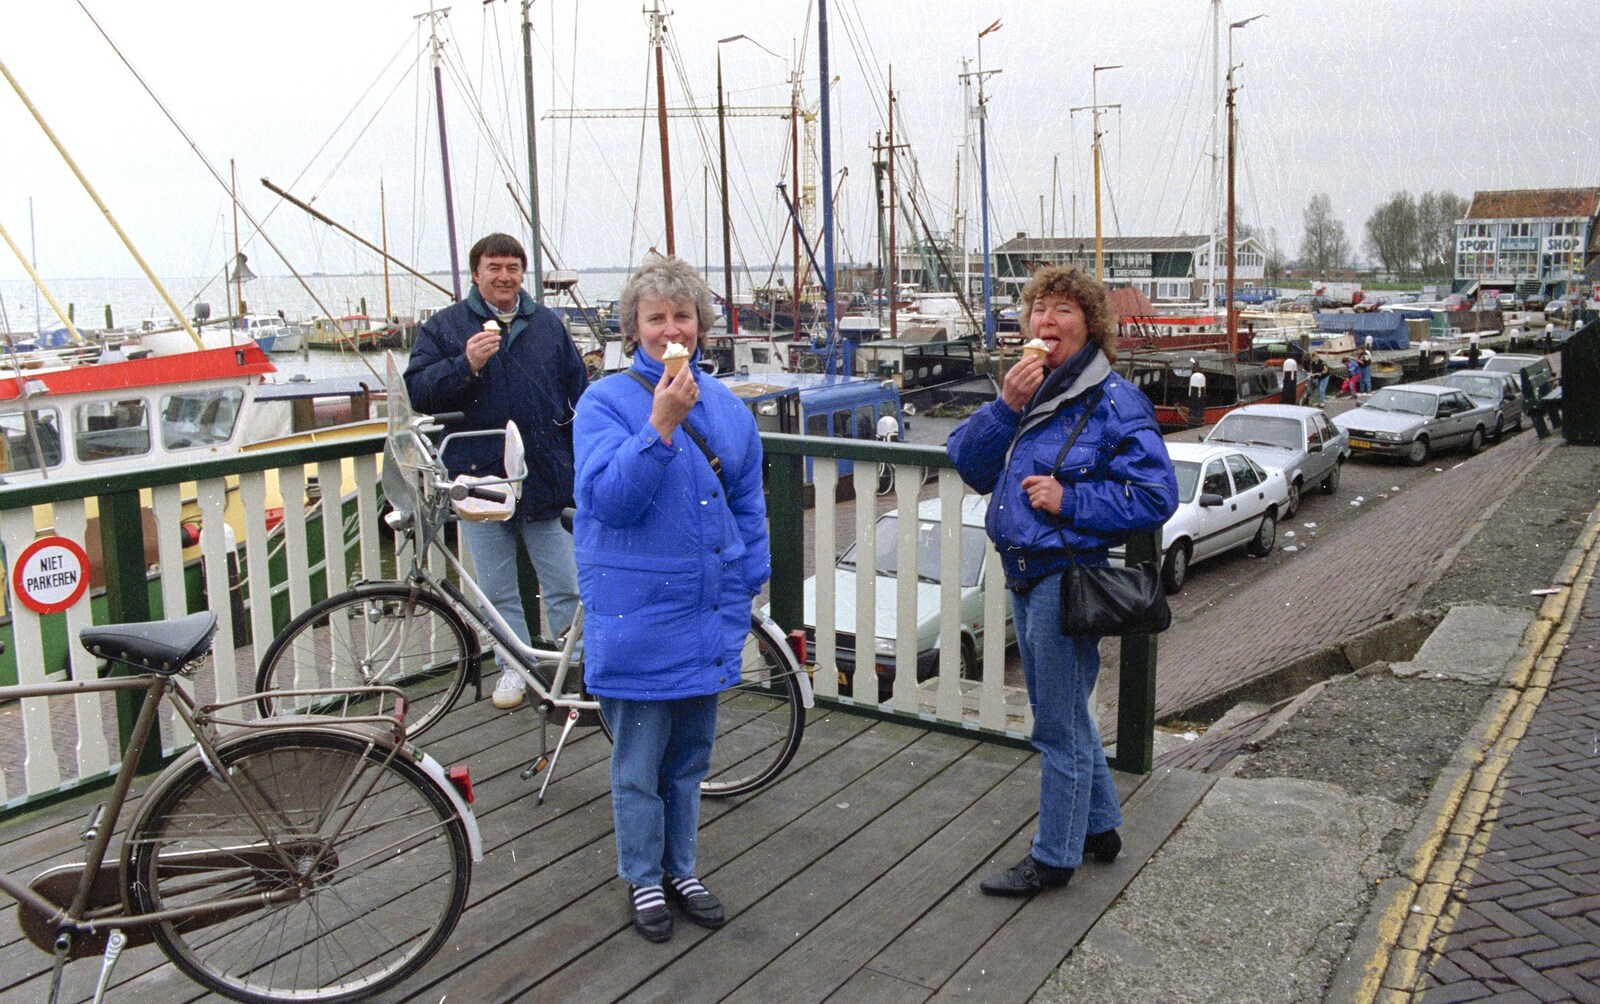 Out and About in Amsterdam, Hoorne, Vollendam and Edam, The Netherlands - 26th March 1992: Corky, Linda and Brenda are ice-creamed up